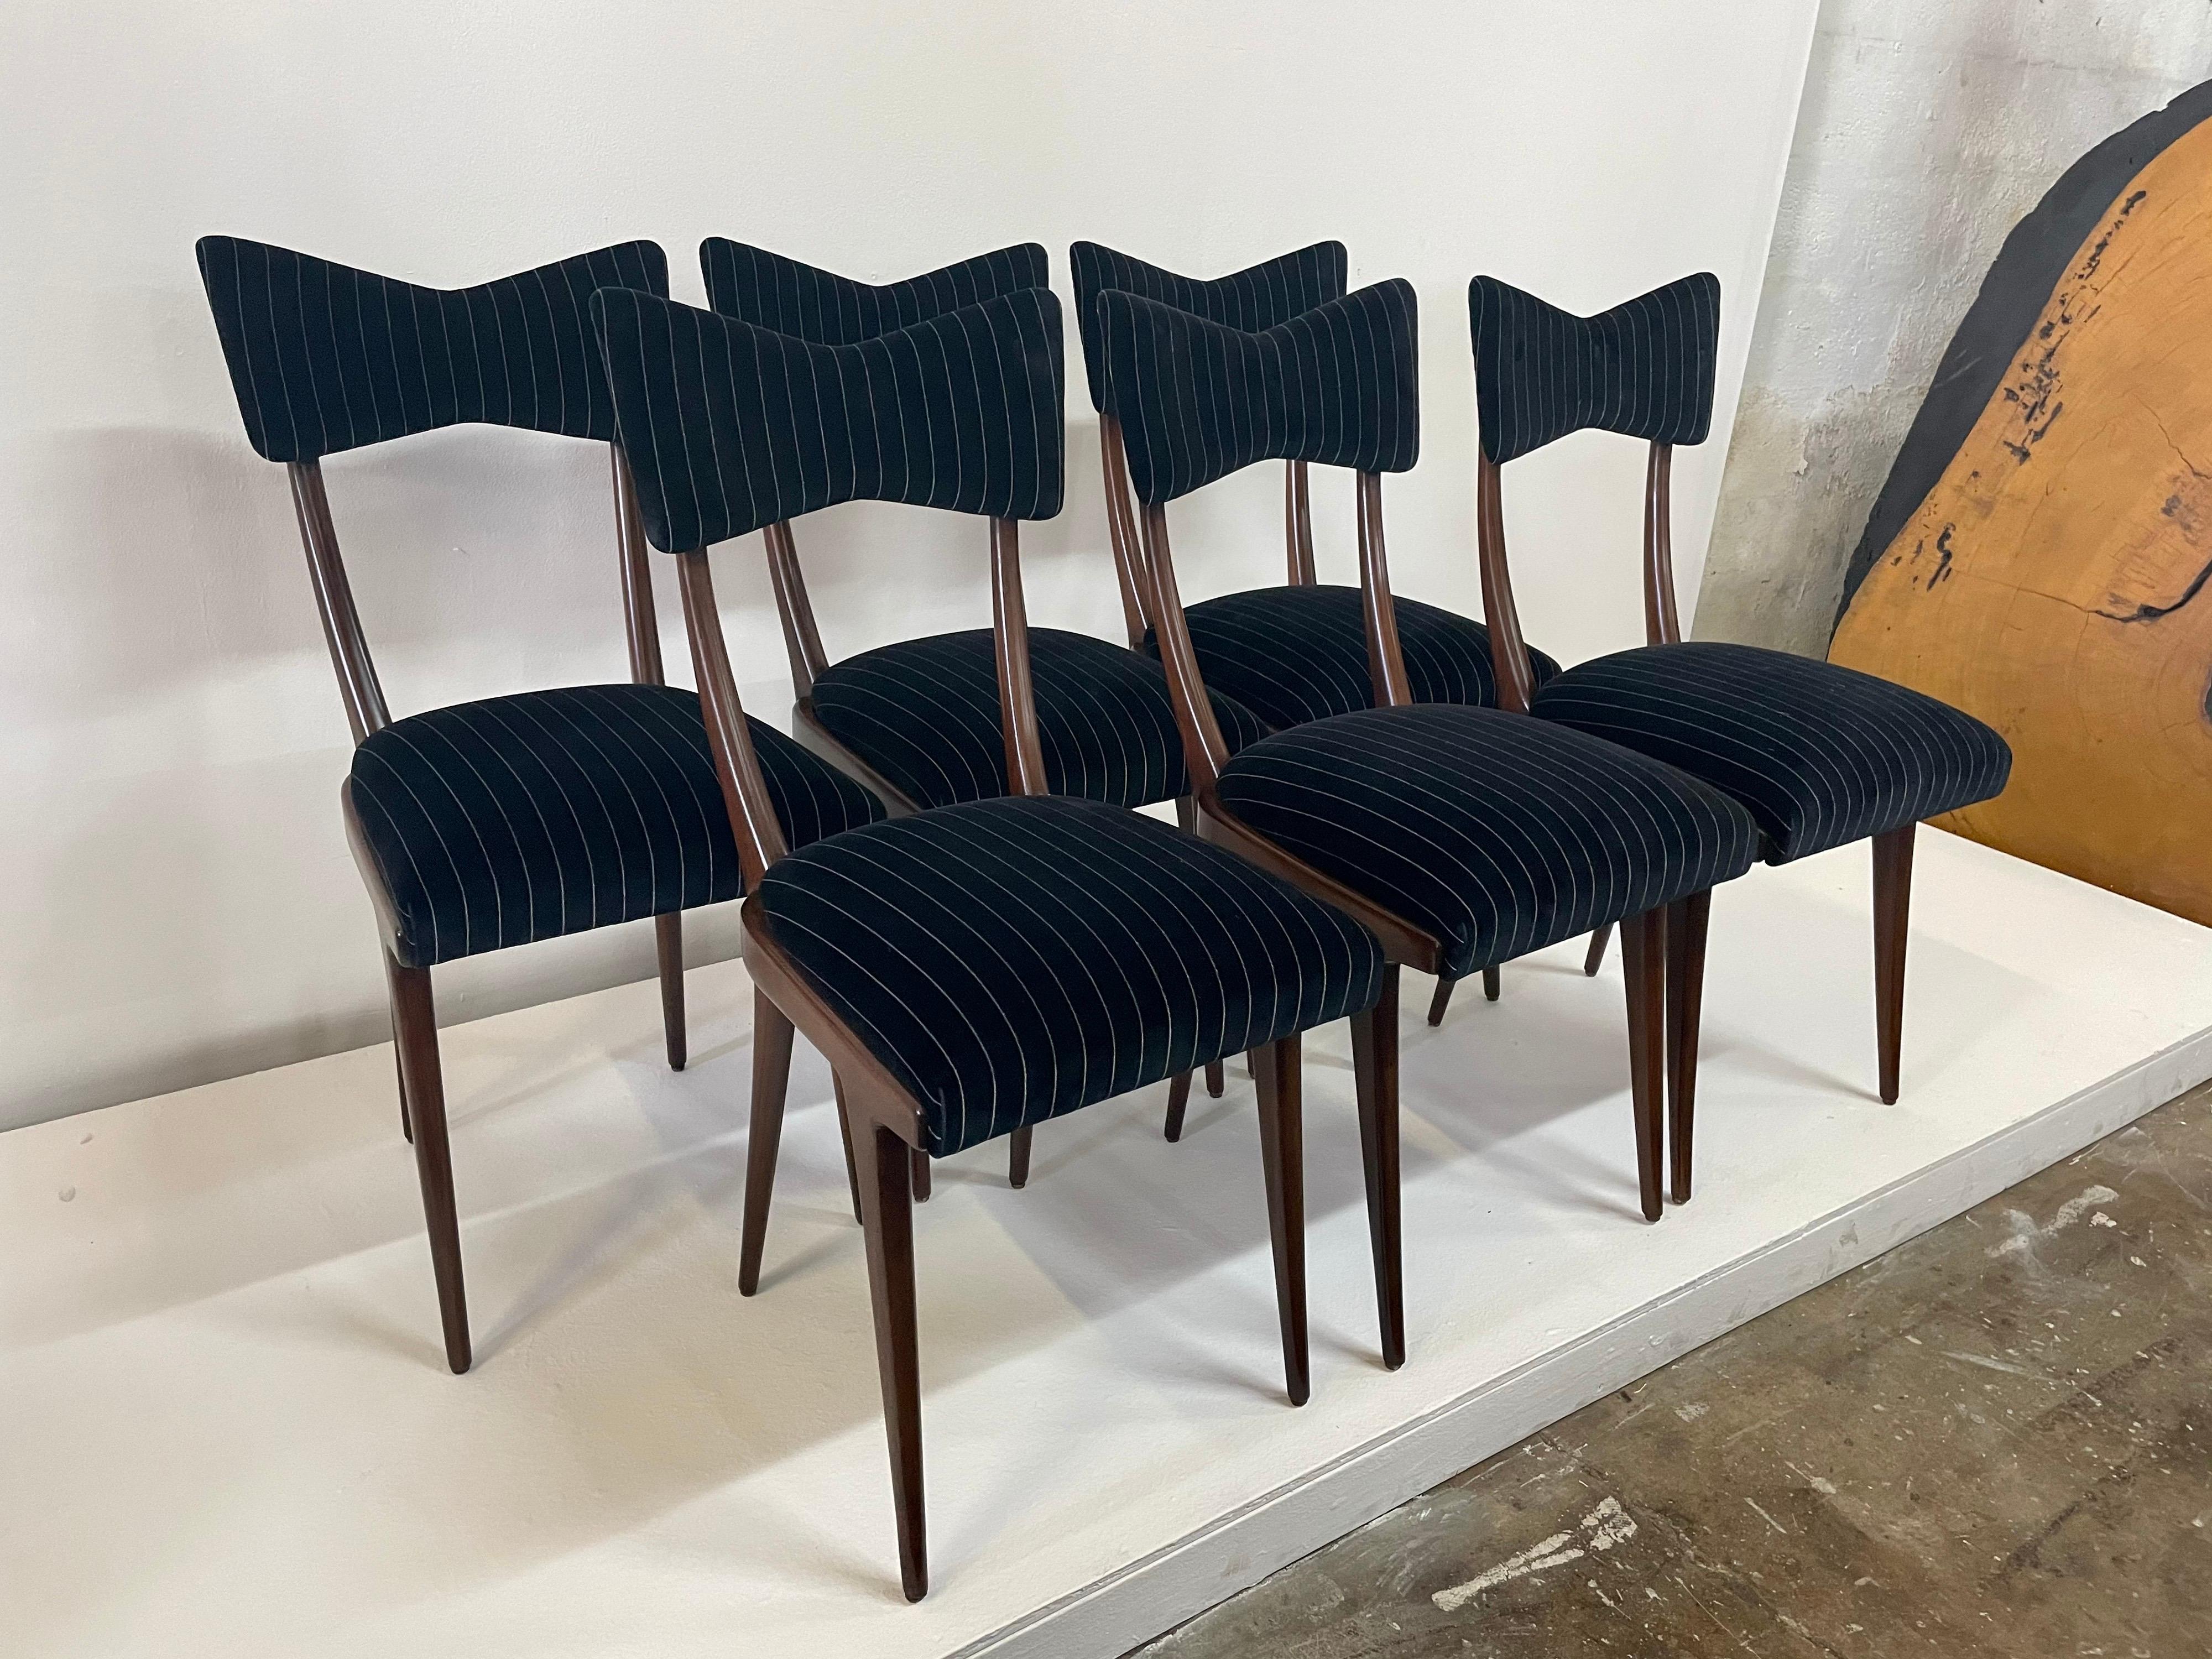 Upholstered in a chic black and white striped velvet, these stylish and iconic designer dining chairs are ready to use, excellent vintage condition.